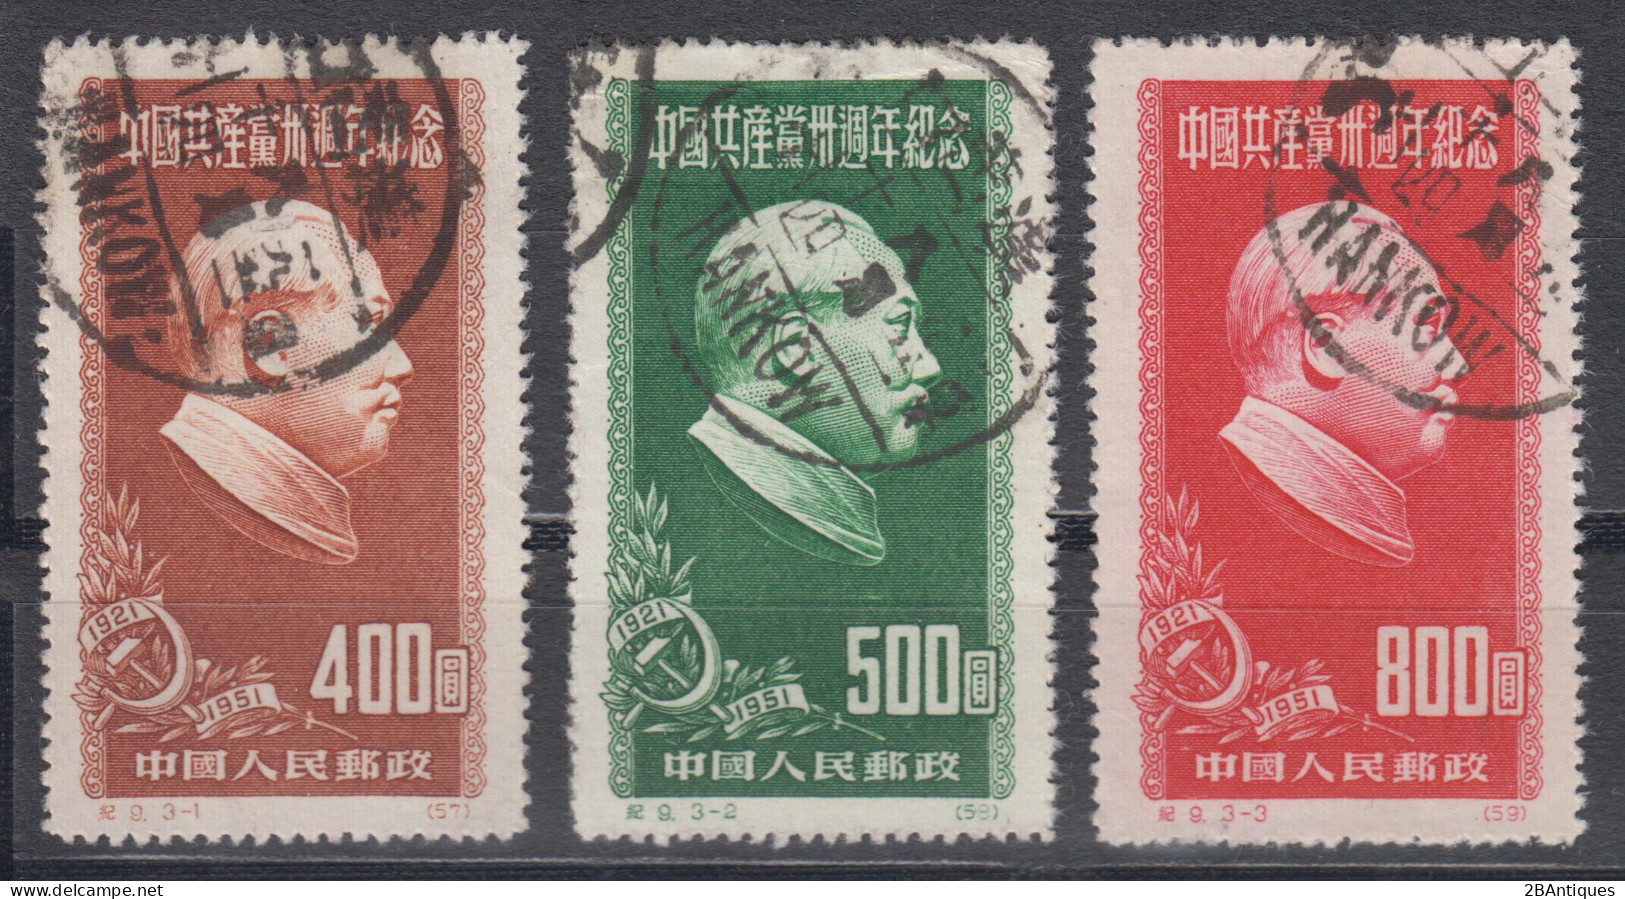 PR CHINA 1951 - The 30th Anniversary Of The Communist Party Of China - Mao Zedong ORIGINAL PRINT COMPLETE! - Used Stamps